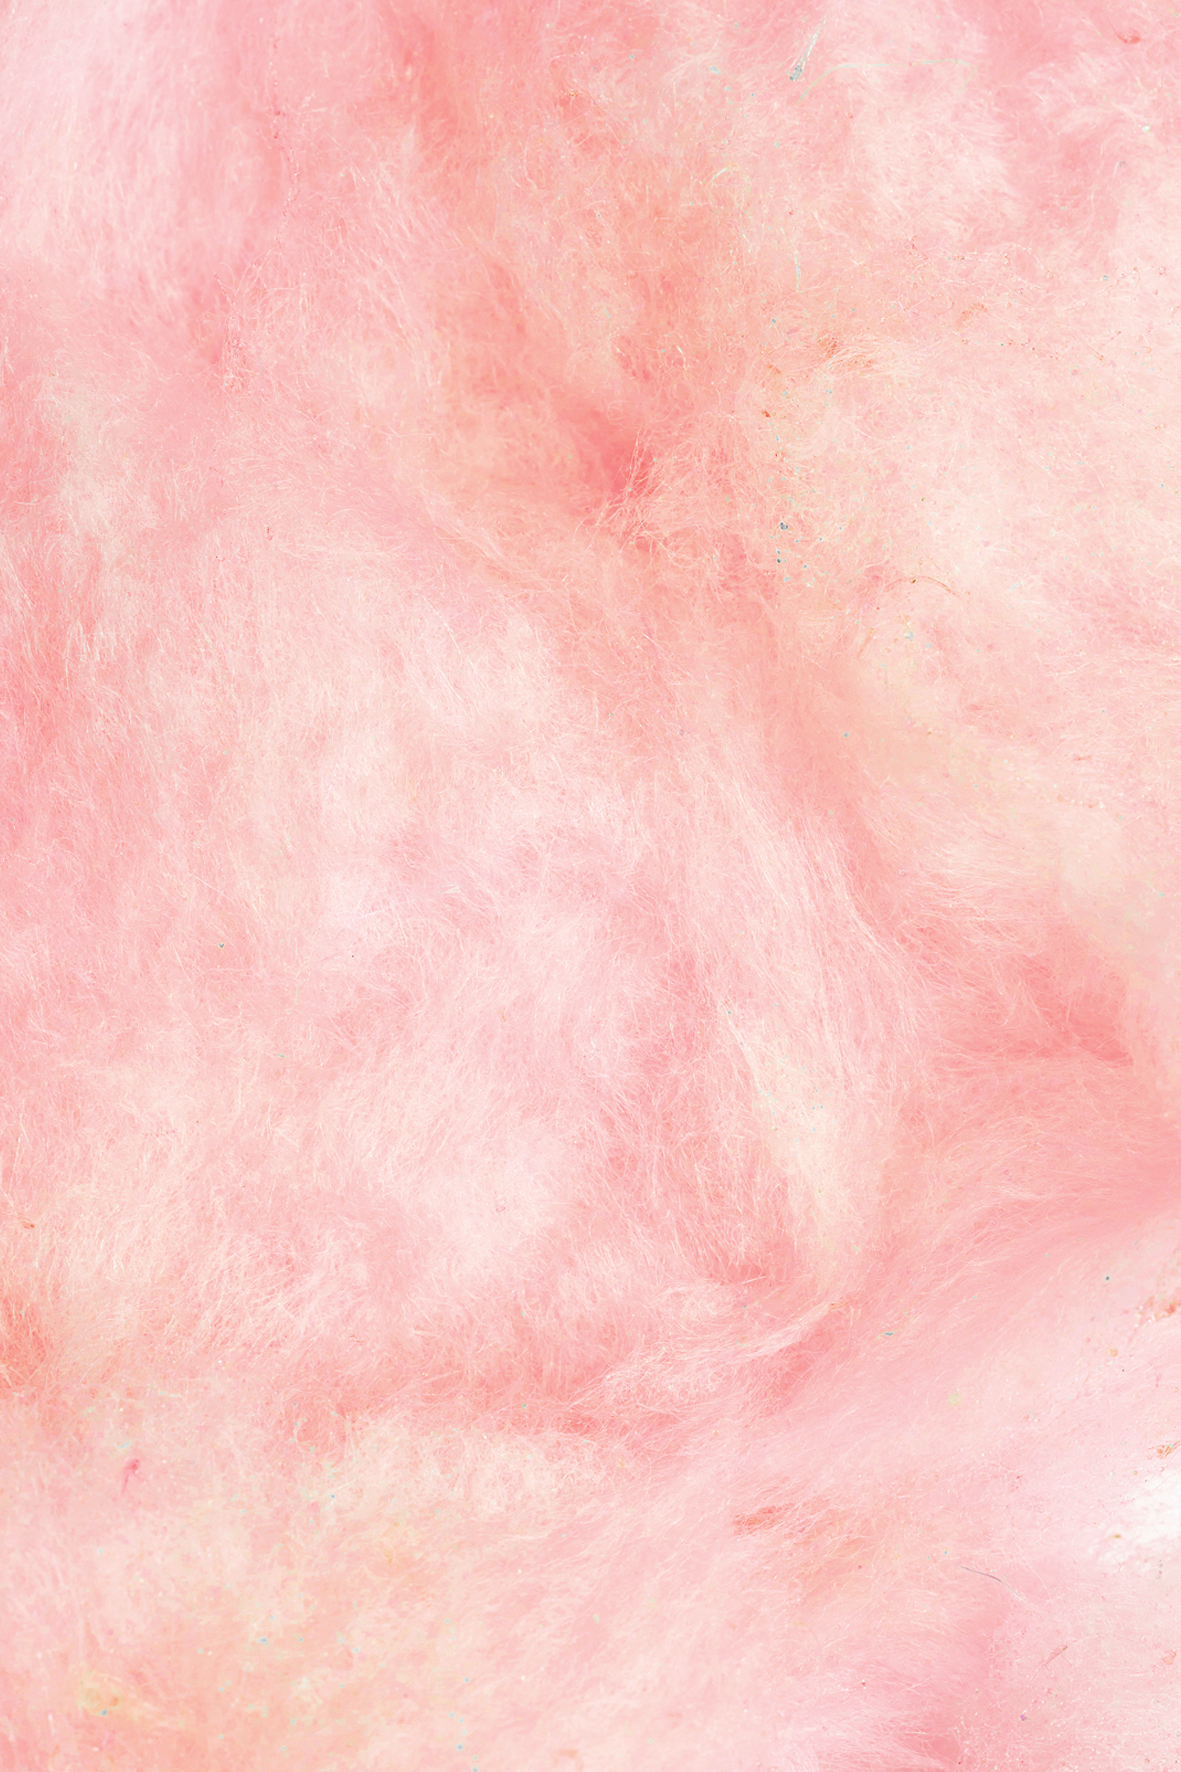 Flossie - Strawberry Cotton Candy